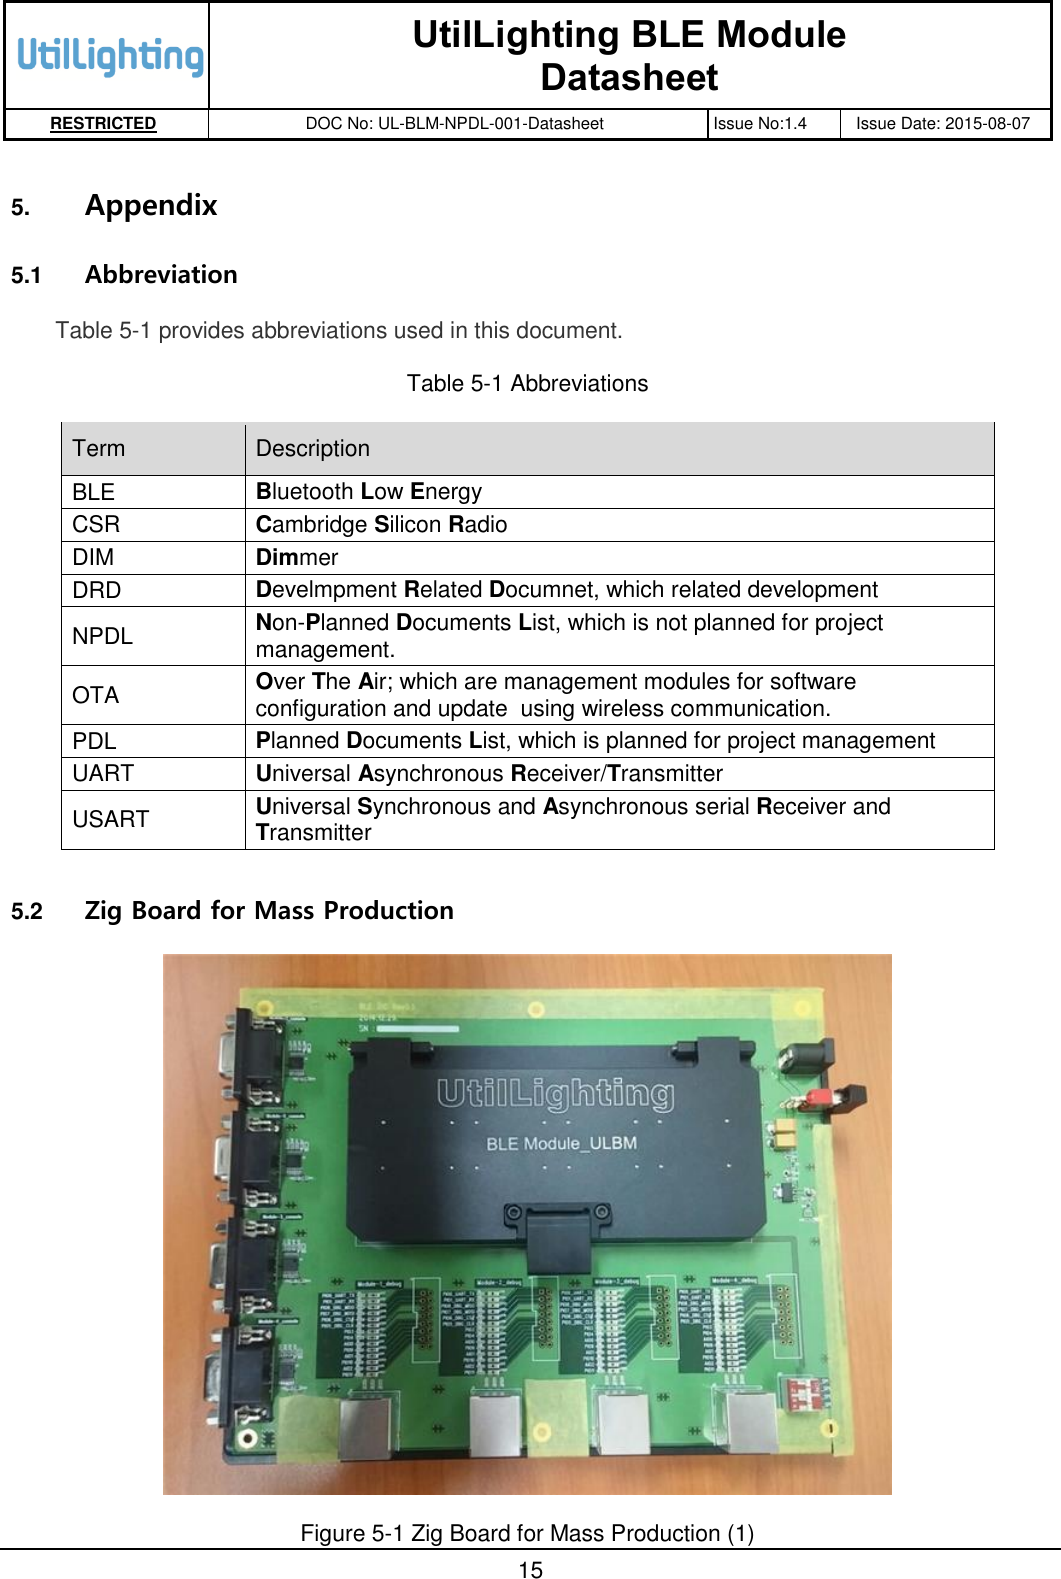   UtilLighting BLE Module Datasheet RESTRICTED DOC No: UL-BLM-NPDL-001-Datasheet Issue No:1.4 Issue Date: 2015-08-07       15  5. Appendix 5.1  Abbreviation Table 5-1 provides abbreviations used in this document.  Table 5-1 Abbreviations Term Description BLE Bluetooth Low Energy CSR Cambridge Silicon Radio DIM Dimmer DRD Develmpment Related Documnet, which related development  NPDL Non-Planned Documents List, which is not planned for project management. OTA Over The Air; which are management modules for software configuration and update  using wireless communication. PDL Planned Documents List, which is planned for project management UART Universal Asynchronous Receiver/Transmitter USART Universal Synchronous and Asynchronous serial Receiver and Transmitter  5.2  Zig Board for Mass Production  Figure 5-1 Zig Board for Mass Production (1) 